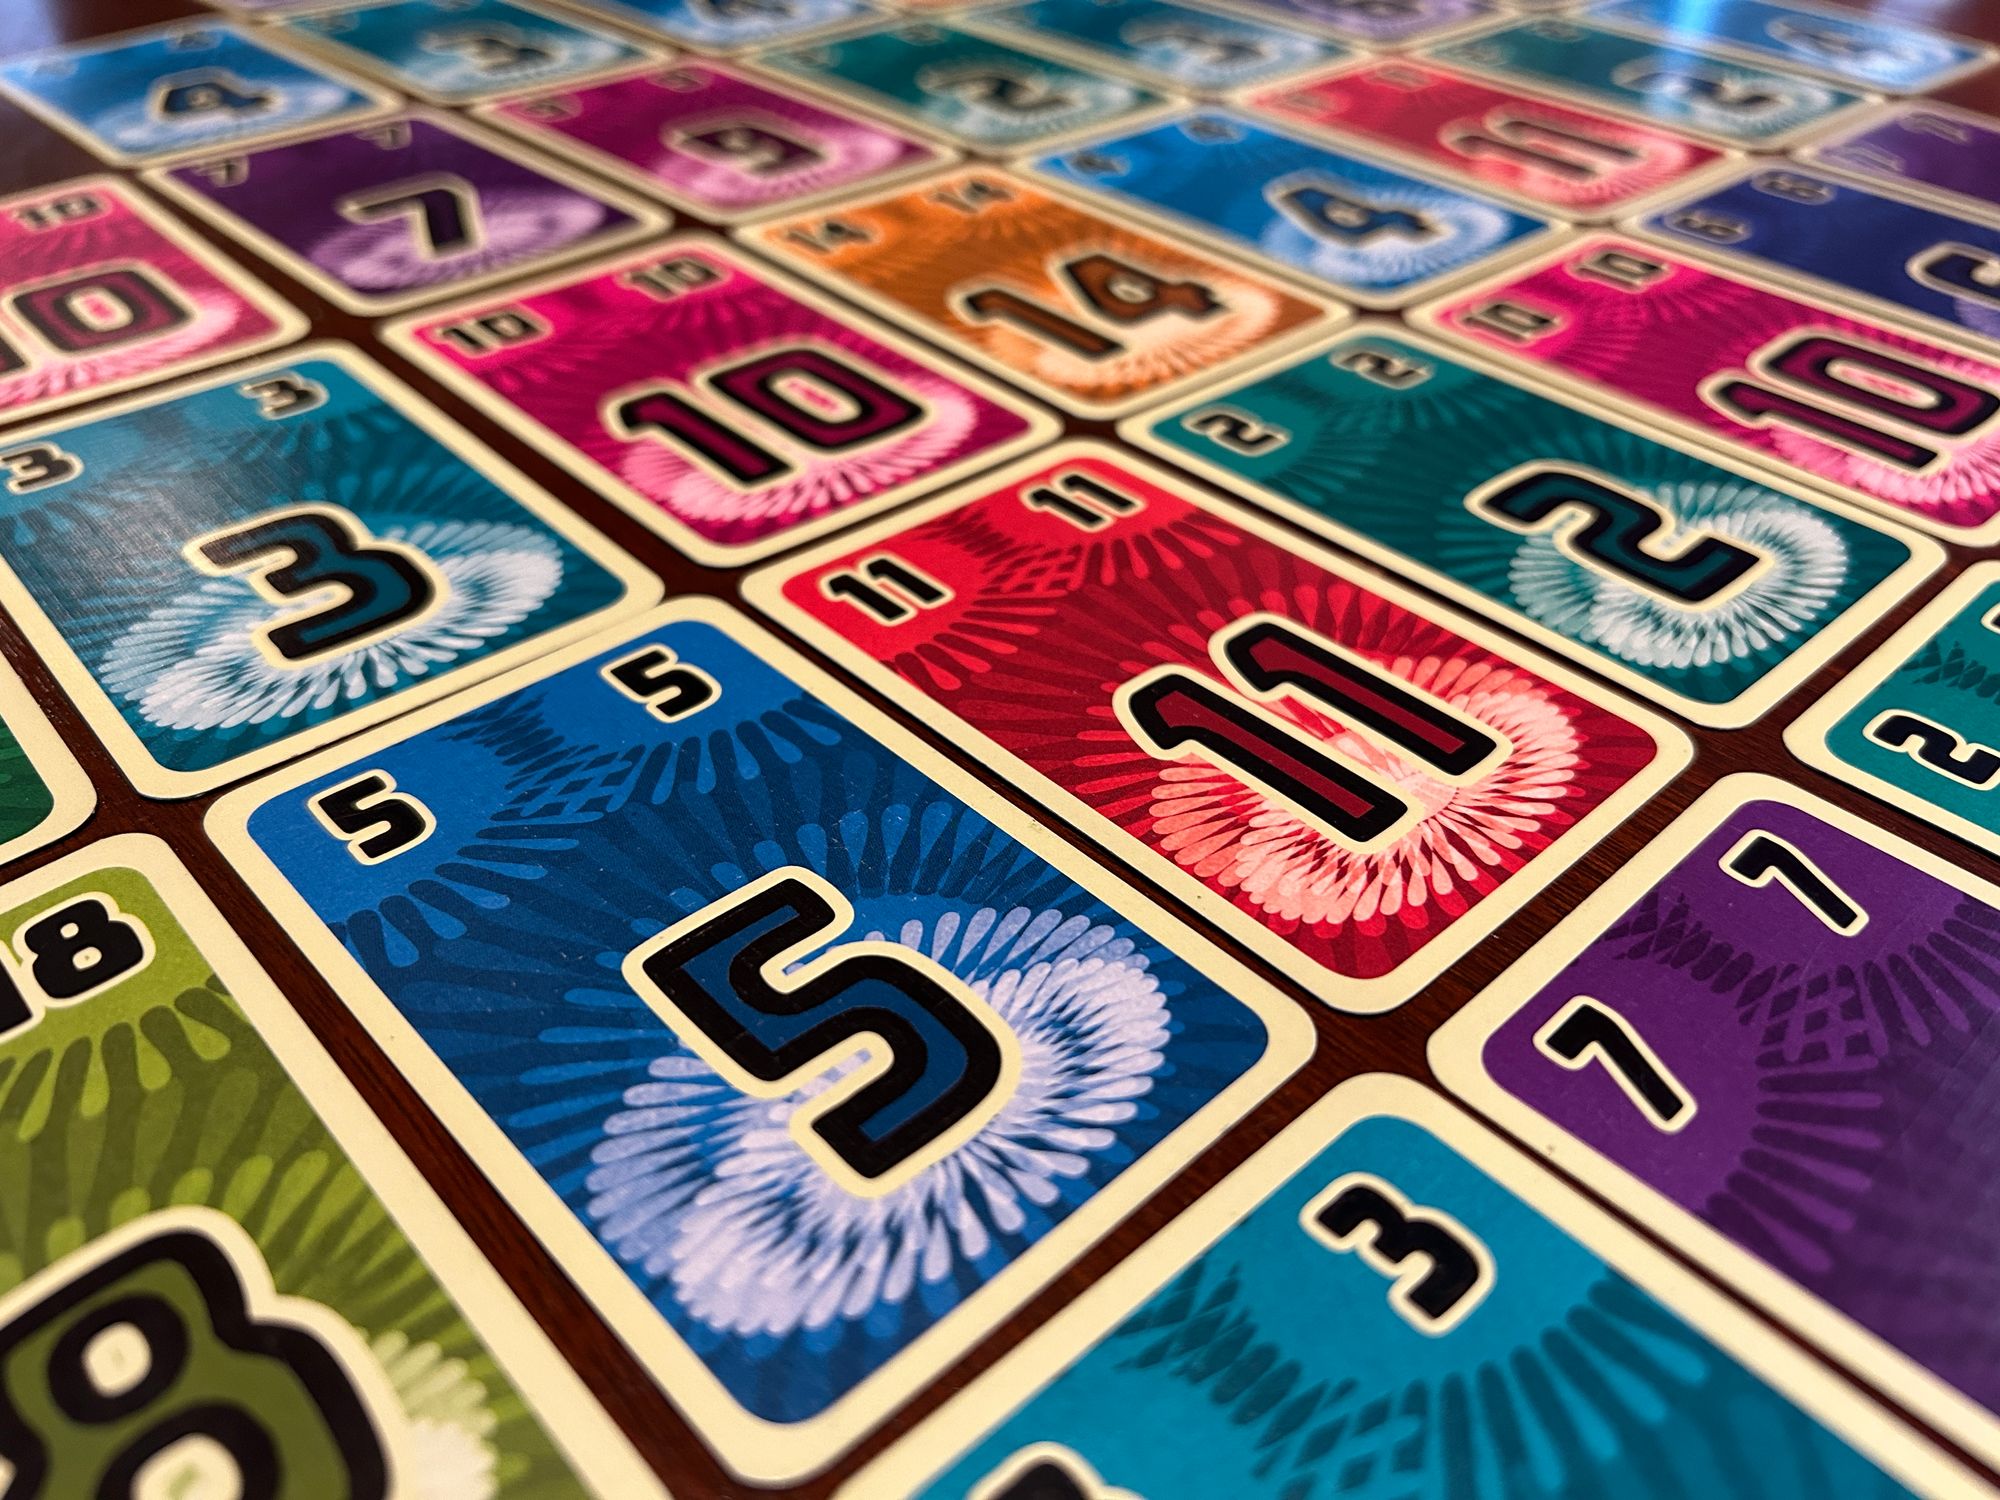 Closeup image of cards from the game Fuji Flush, featuring colorful designs with large numbers